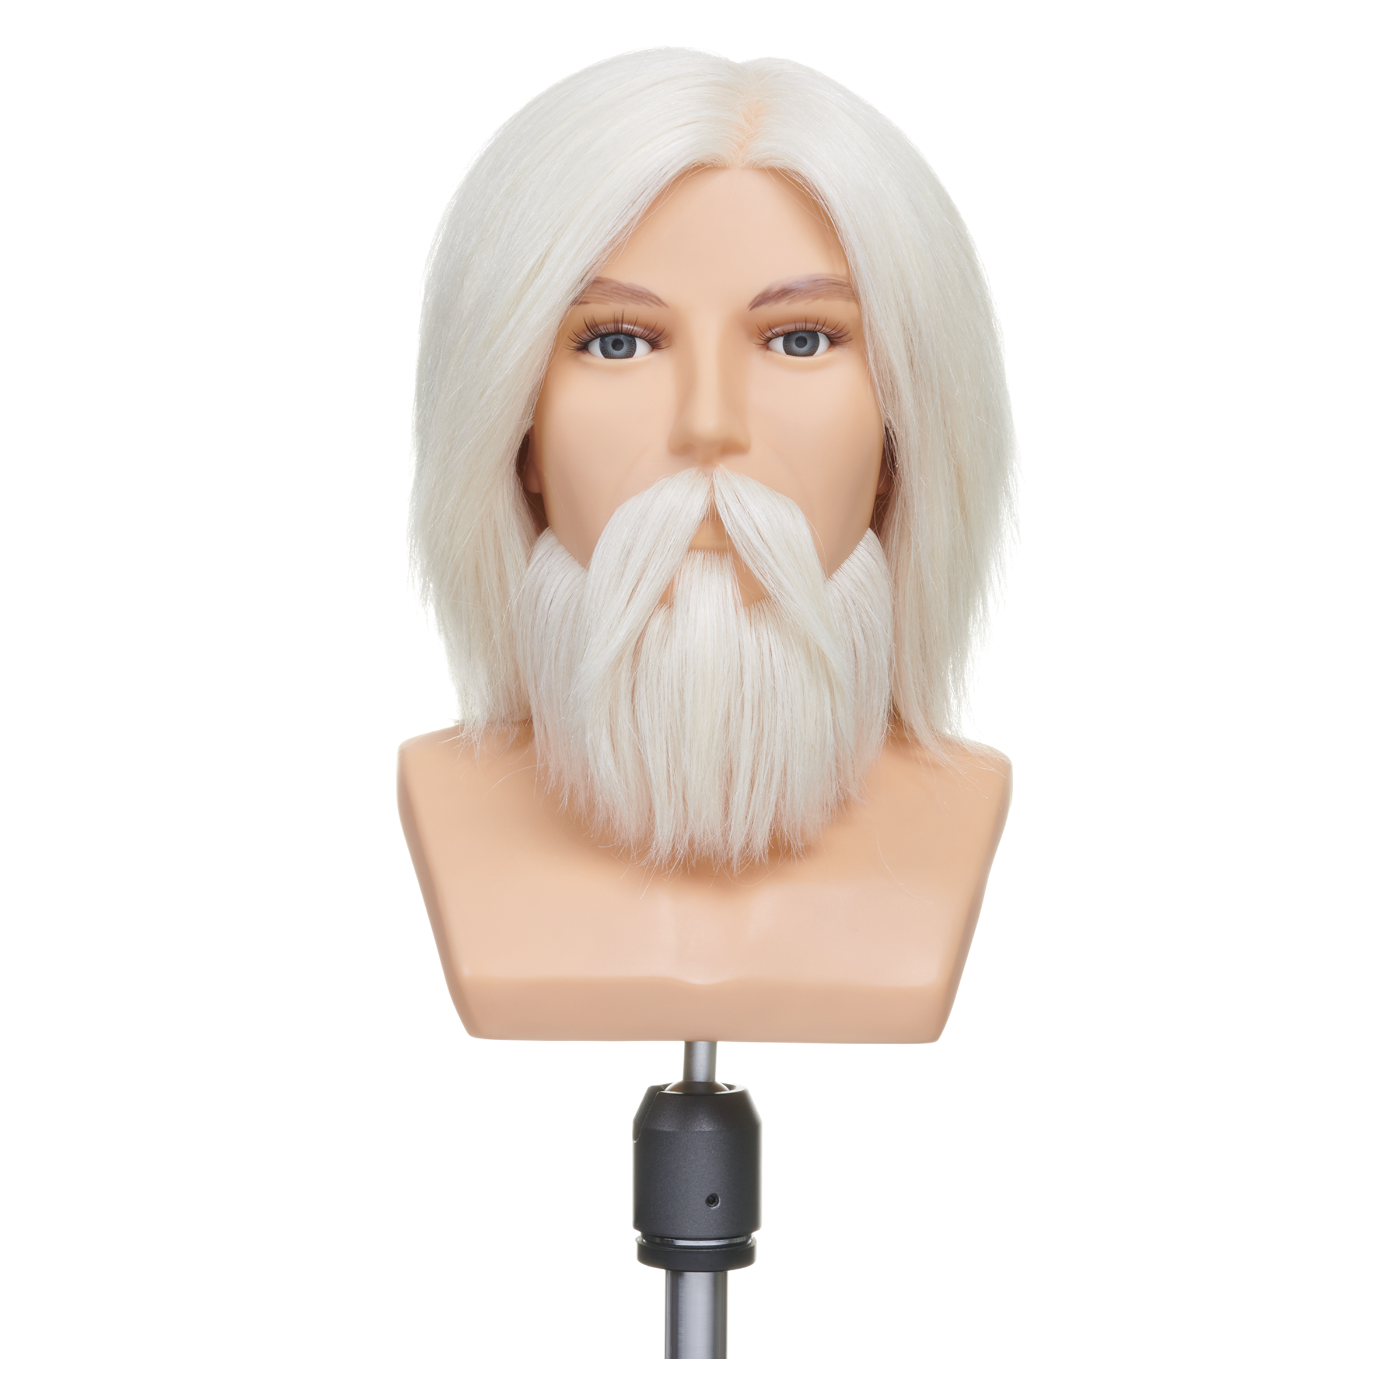 Bearded Male Competition Mannequin - 100% Goat Hair